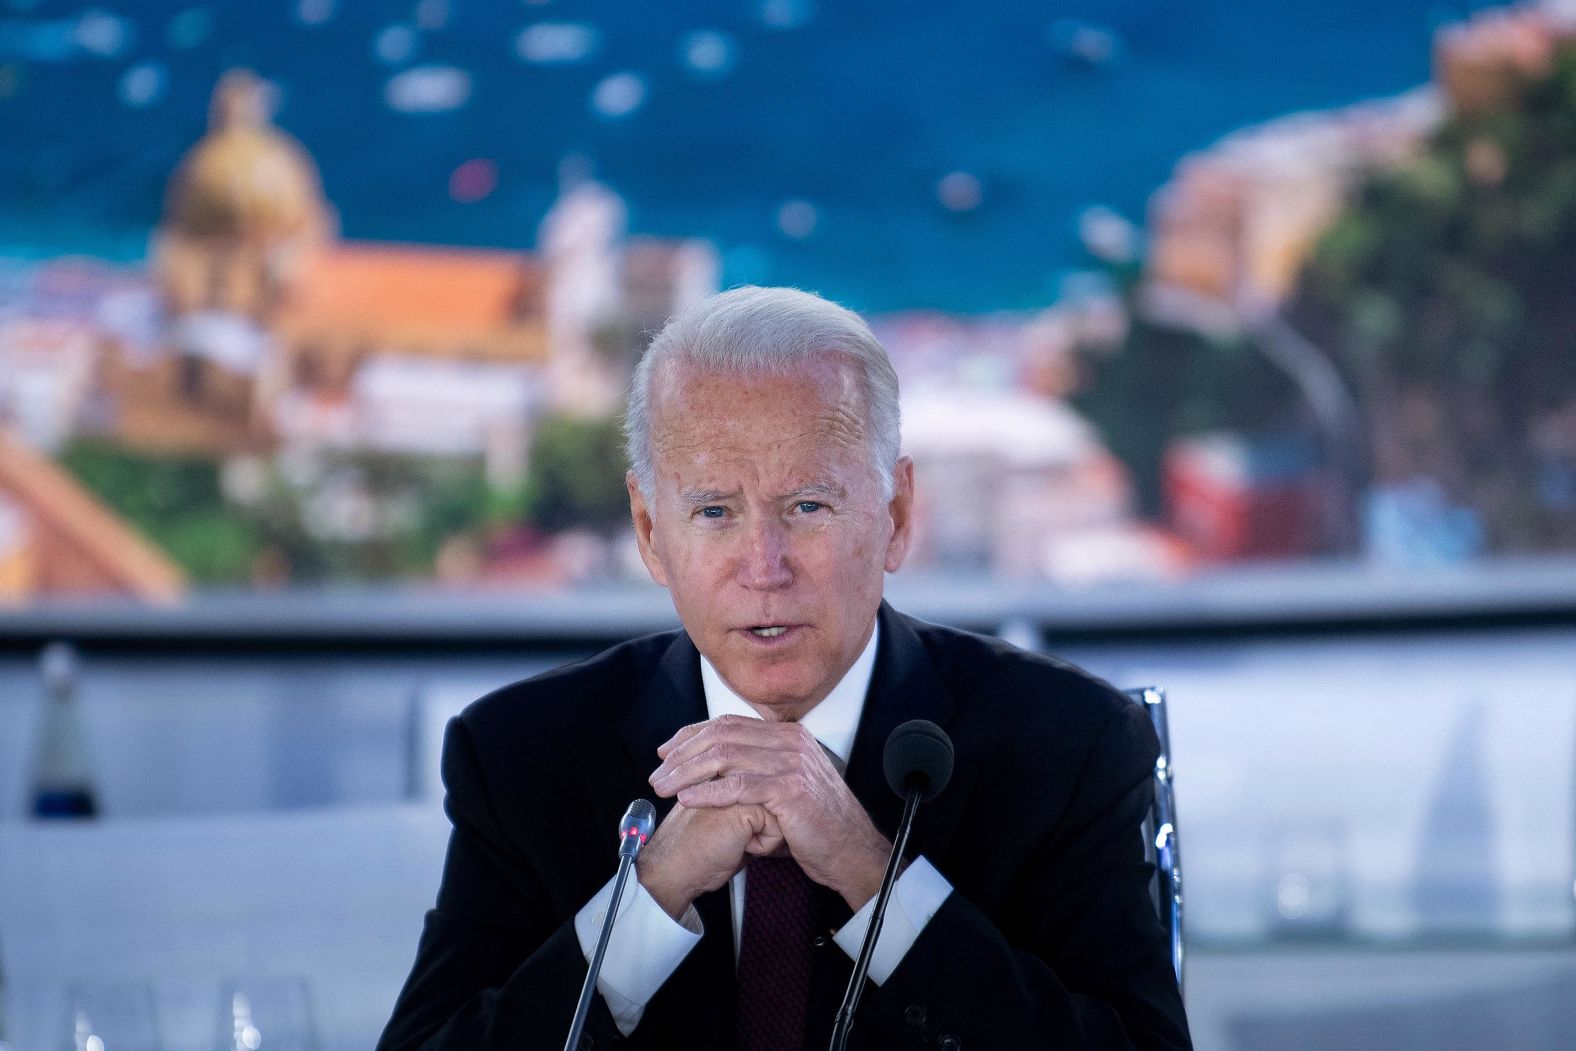 Biden speaks at the beginning of a meeting about global supply chains on Sunday.